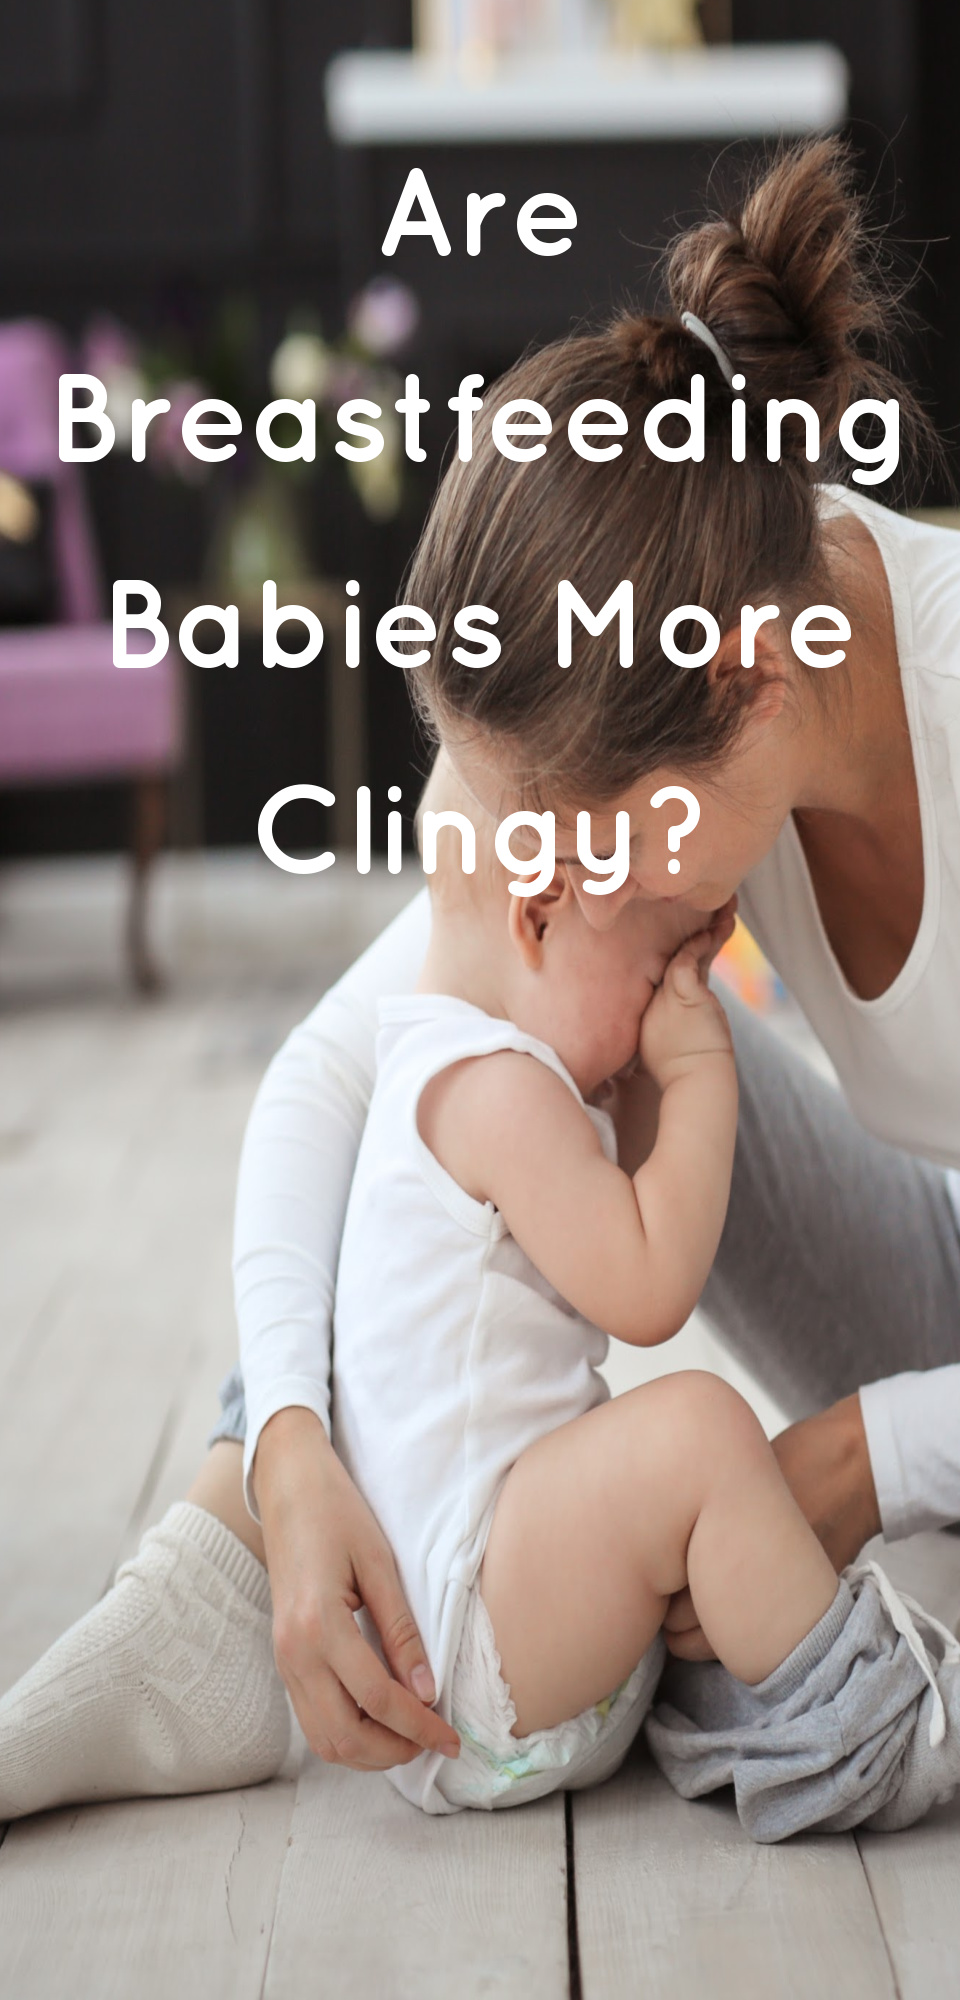 Are Breastfeeding Babies More Clingy?